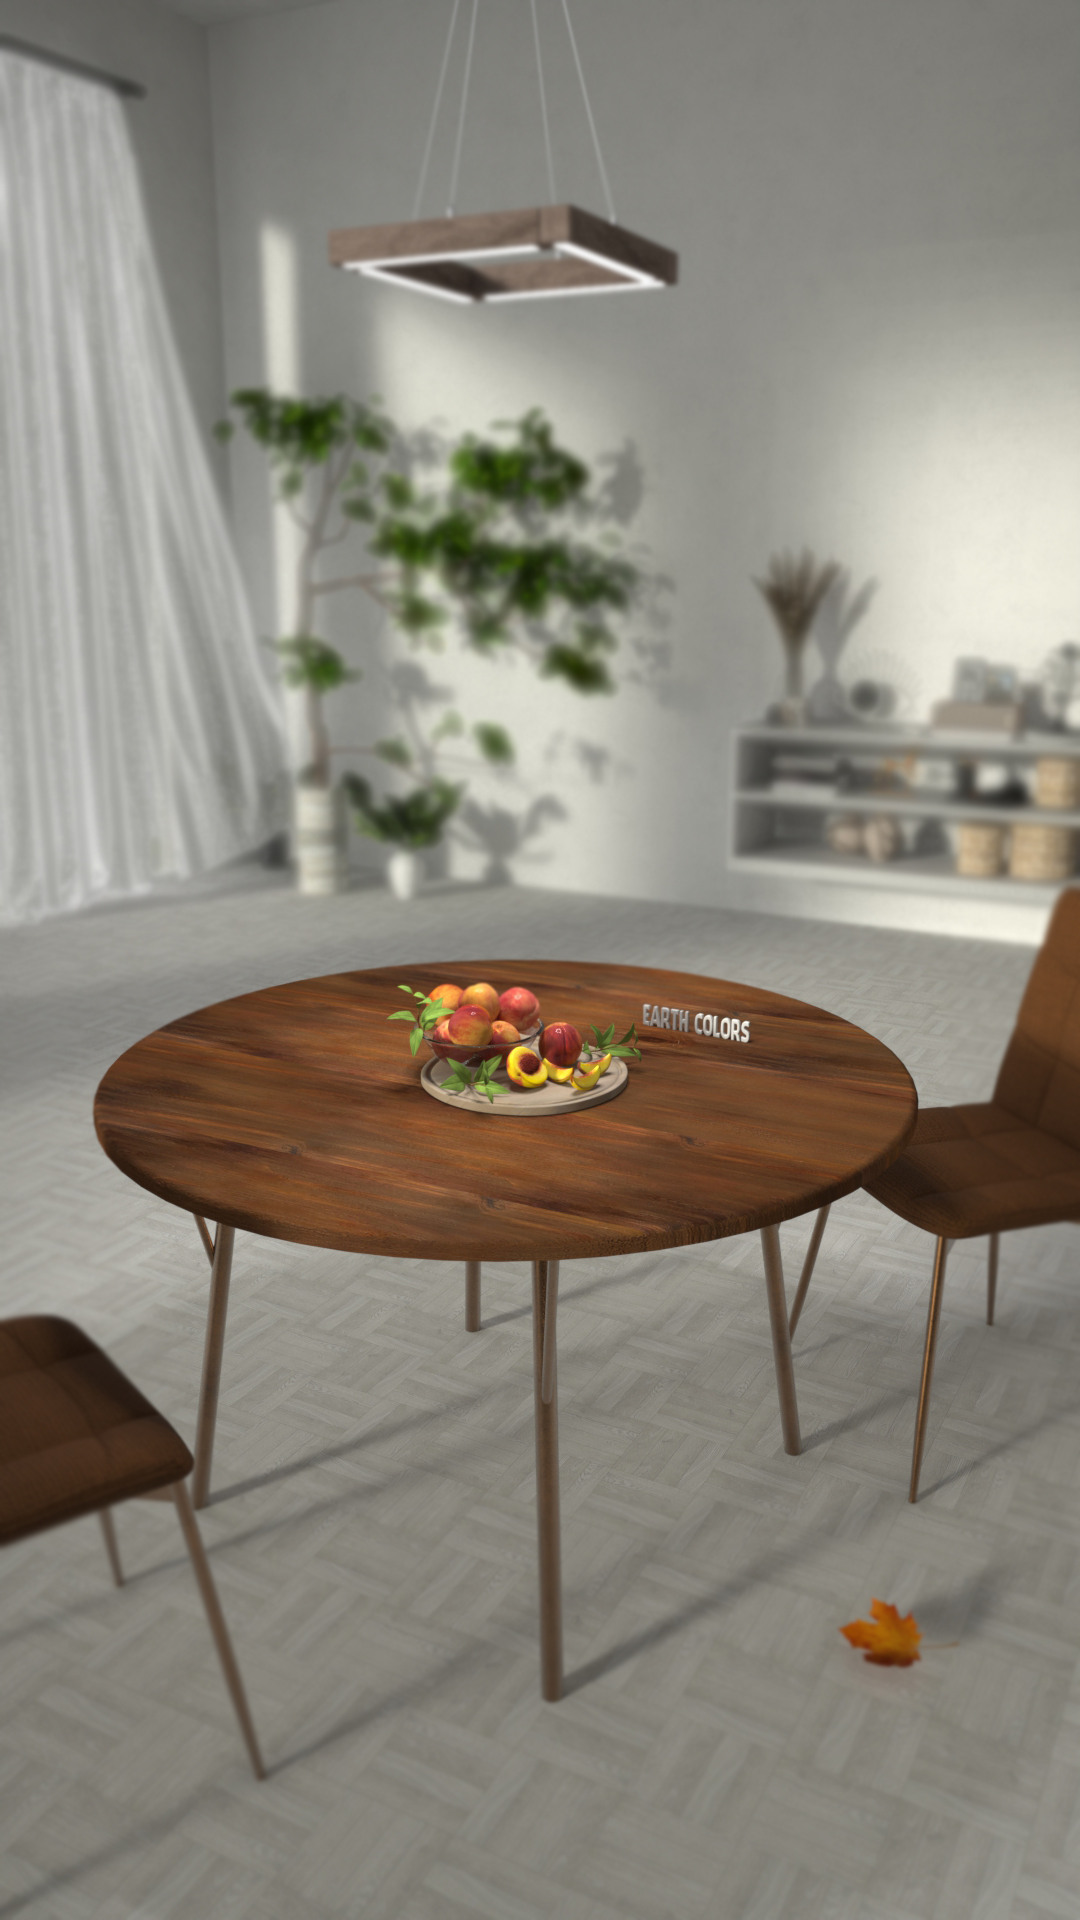 if you are interested in Round kitchen table drop at EARTHCOLORS